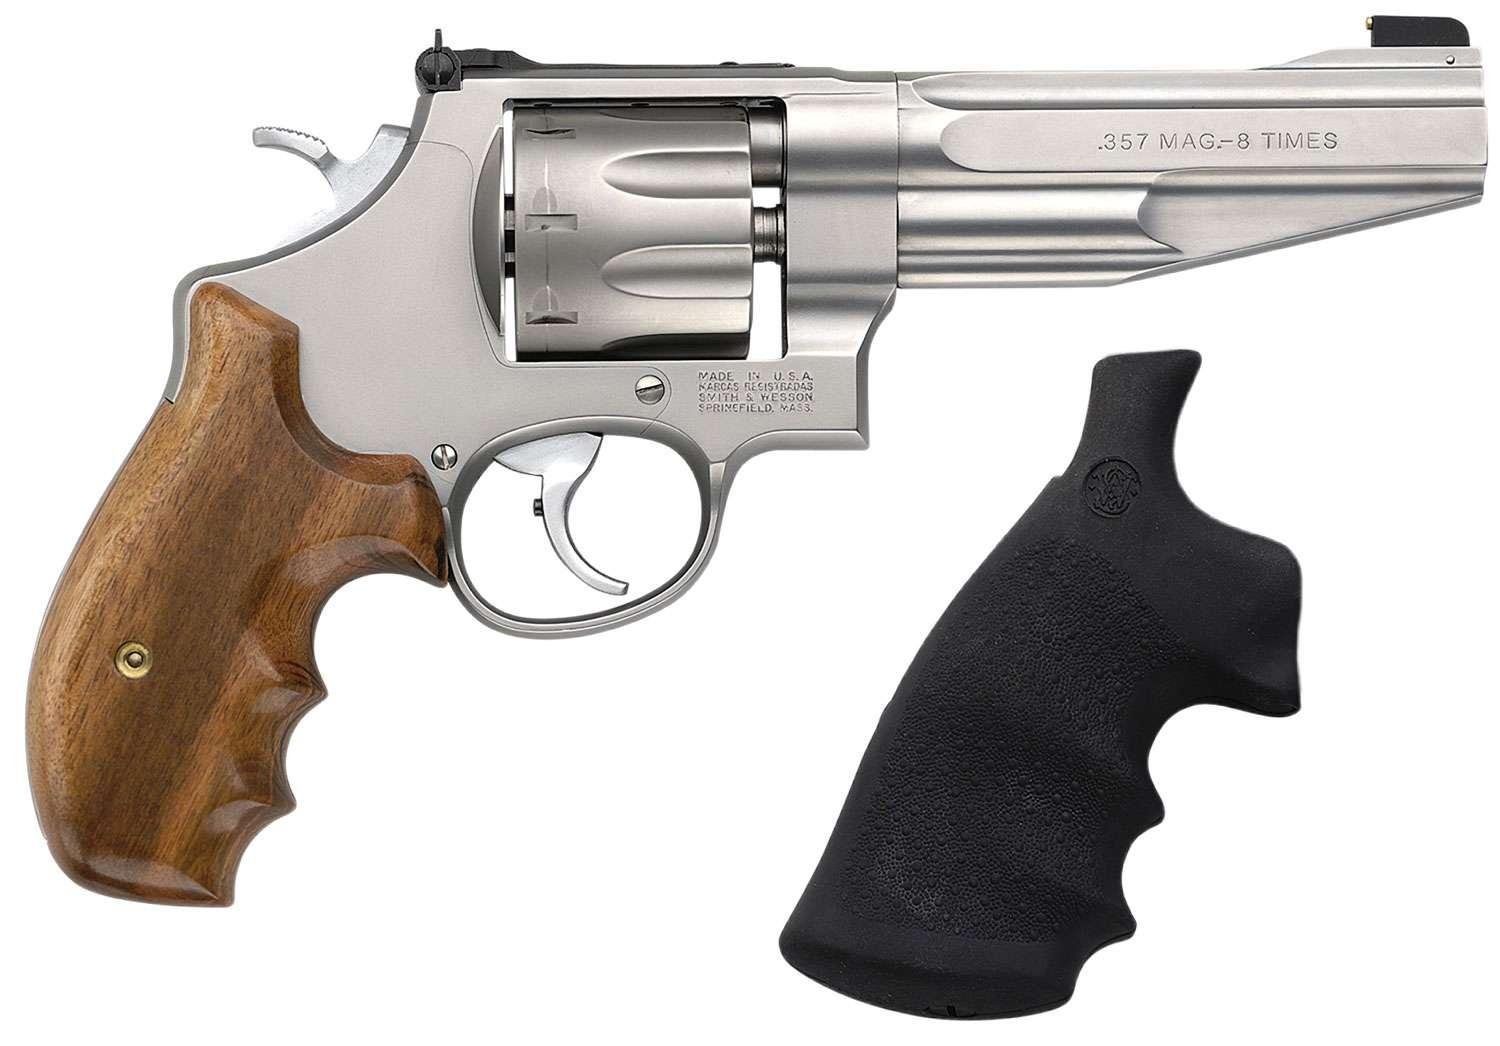 Smith & Wesson 627 Performance Center Stainless .357 Mag 5" Barrel 8-Rounds - $1271.60 (E-Mail Price) (Free S/H on Firearms)